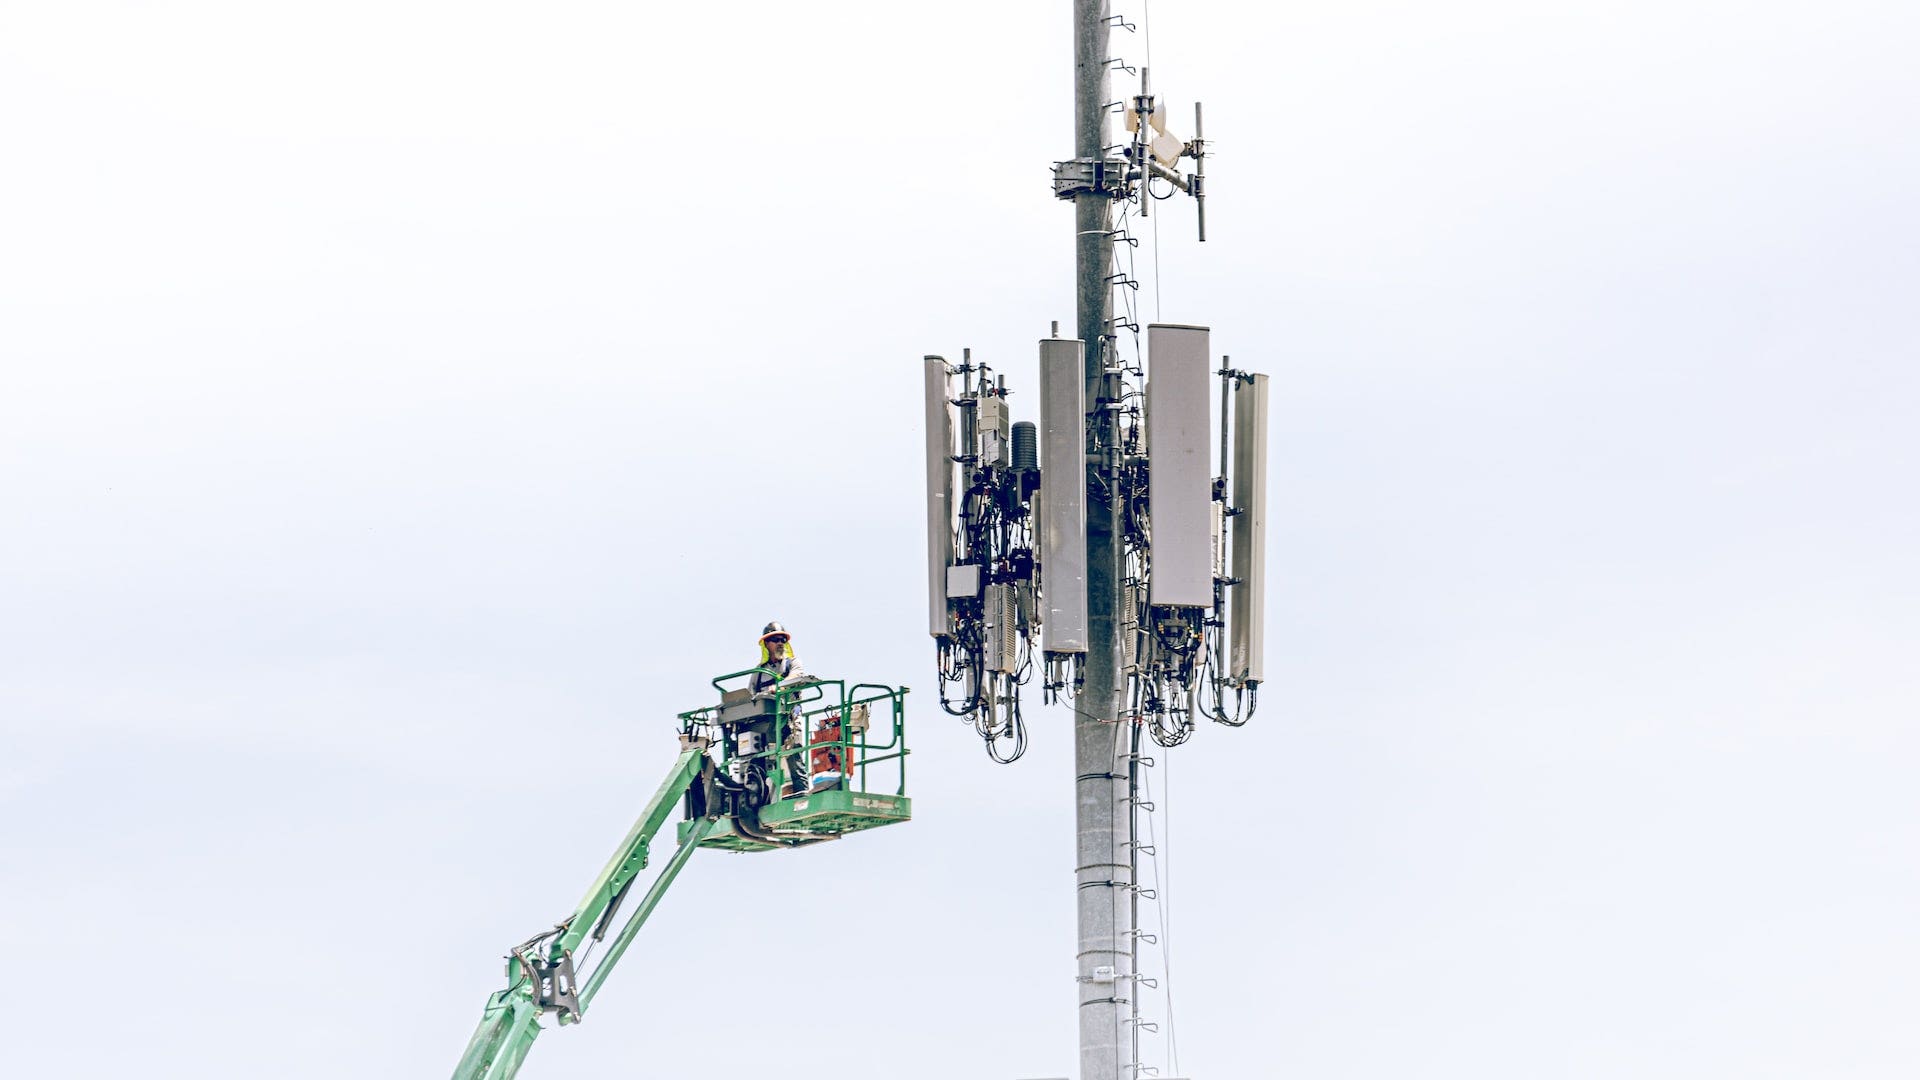 Current Economic Conditions Are Having Little Effect On Cell Phone Tower REIT Investment Returns